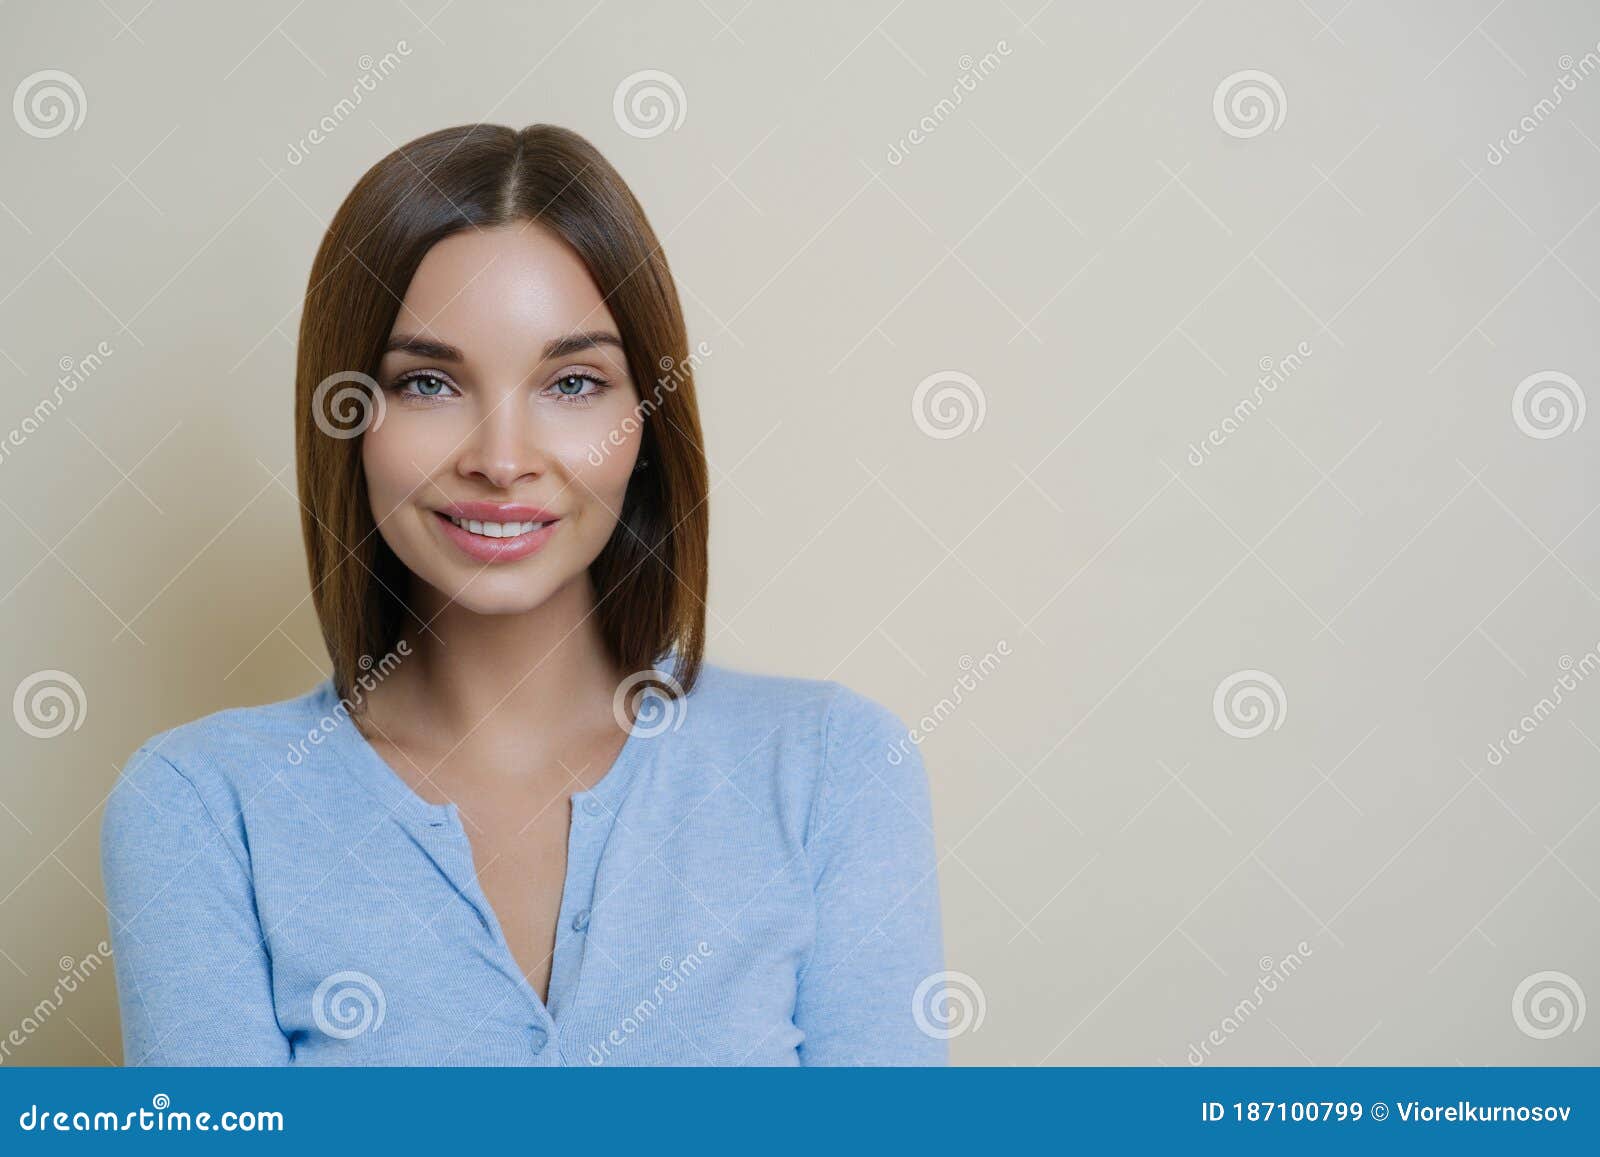 Photo Of Adorable Brunette Woman Has Natural Makeup And Healthy Perfect